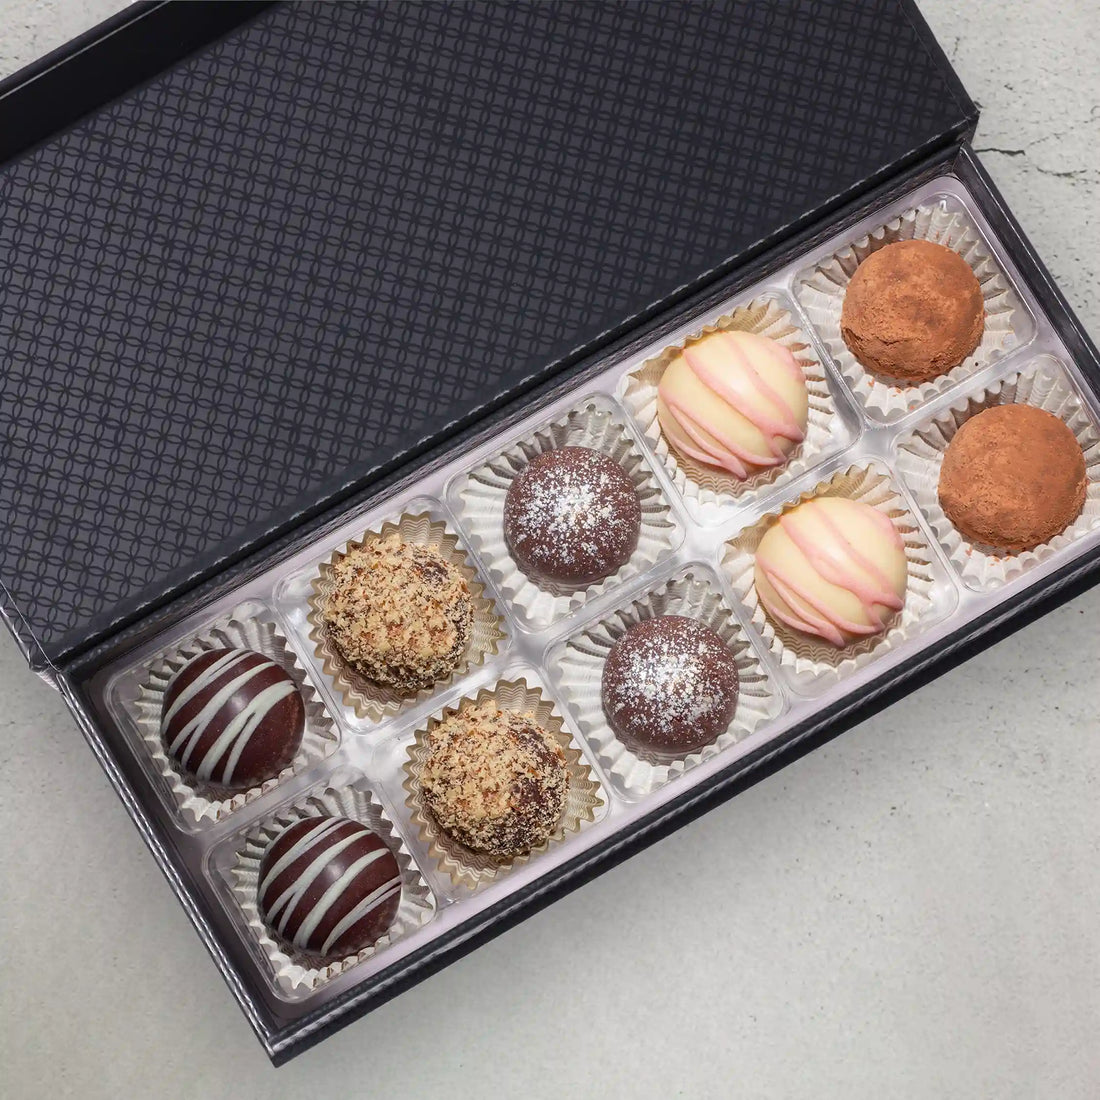 10-piece Luxury Chocolate Gift Box with 10 luxury chocolate truffles, 2 each of 5 flavors